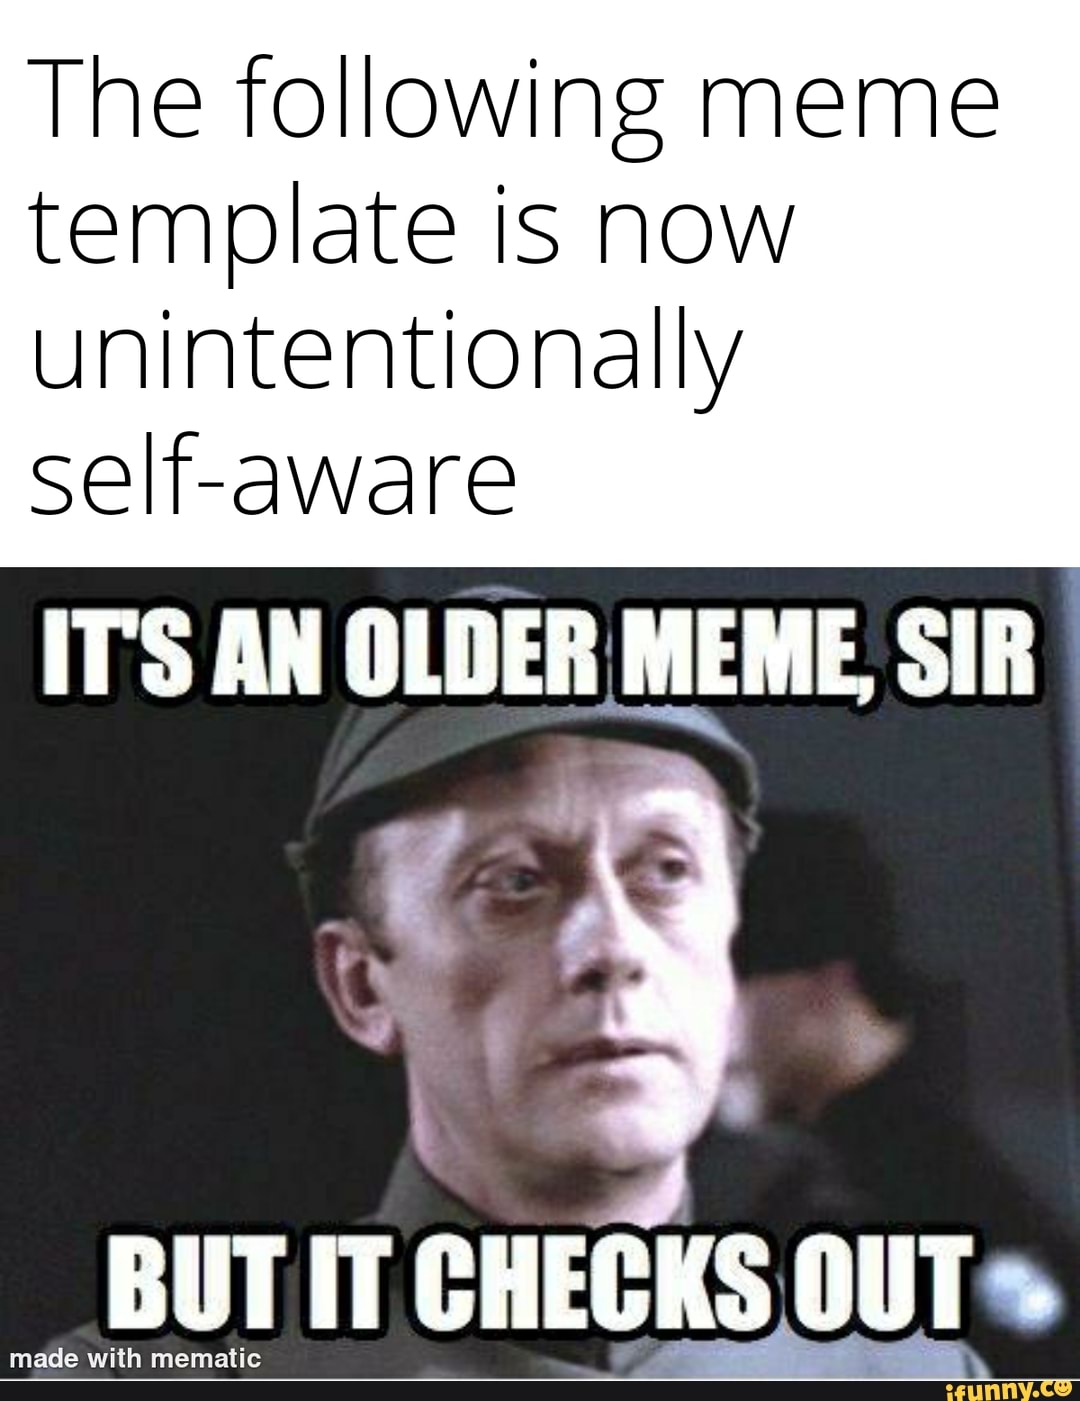 Old memes. When you are old. When meme. When you get older.